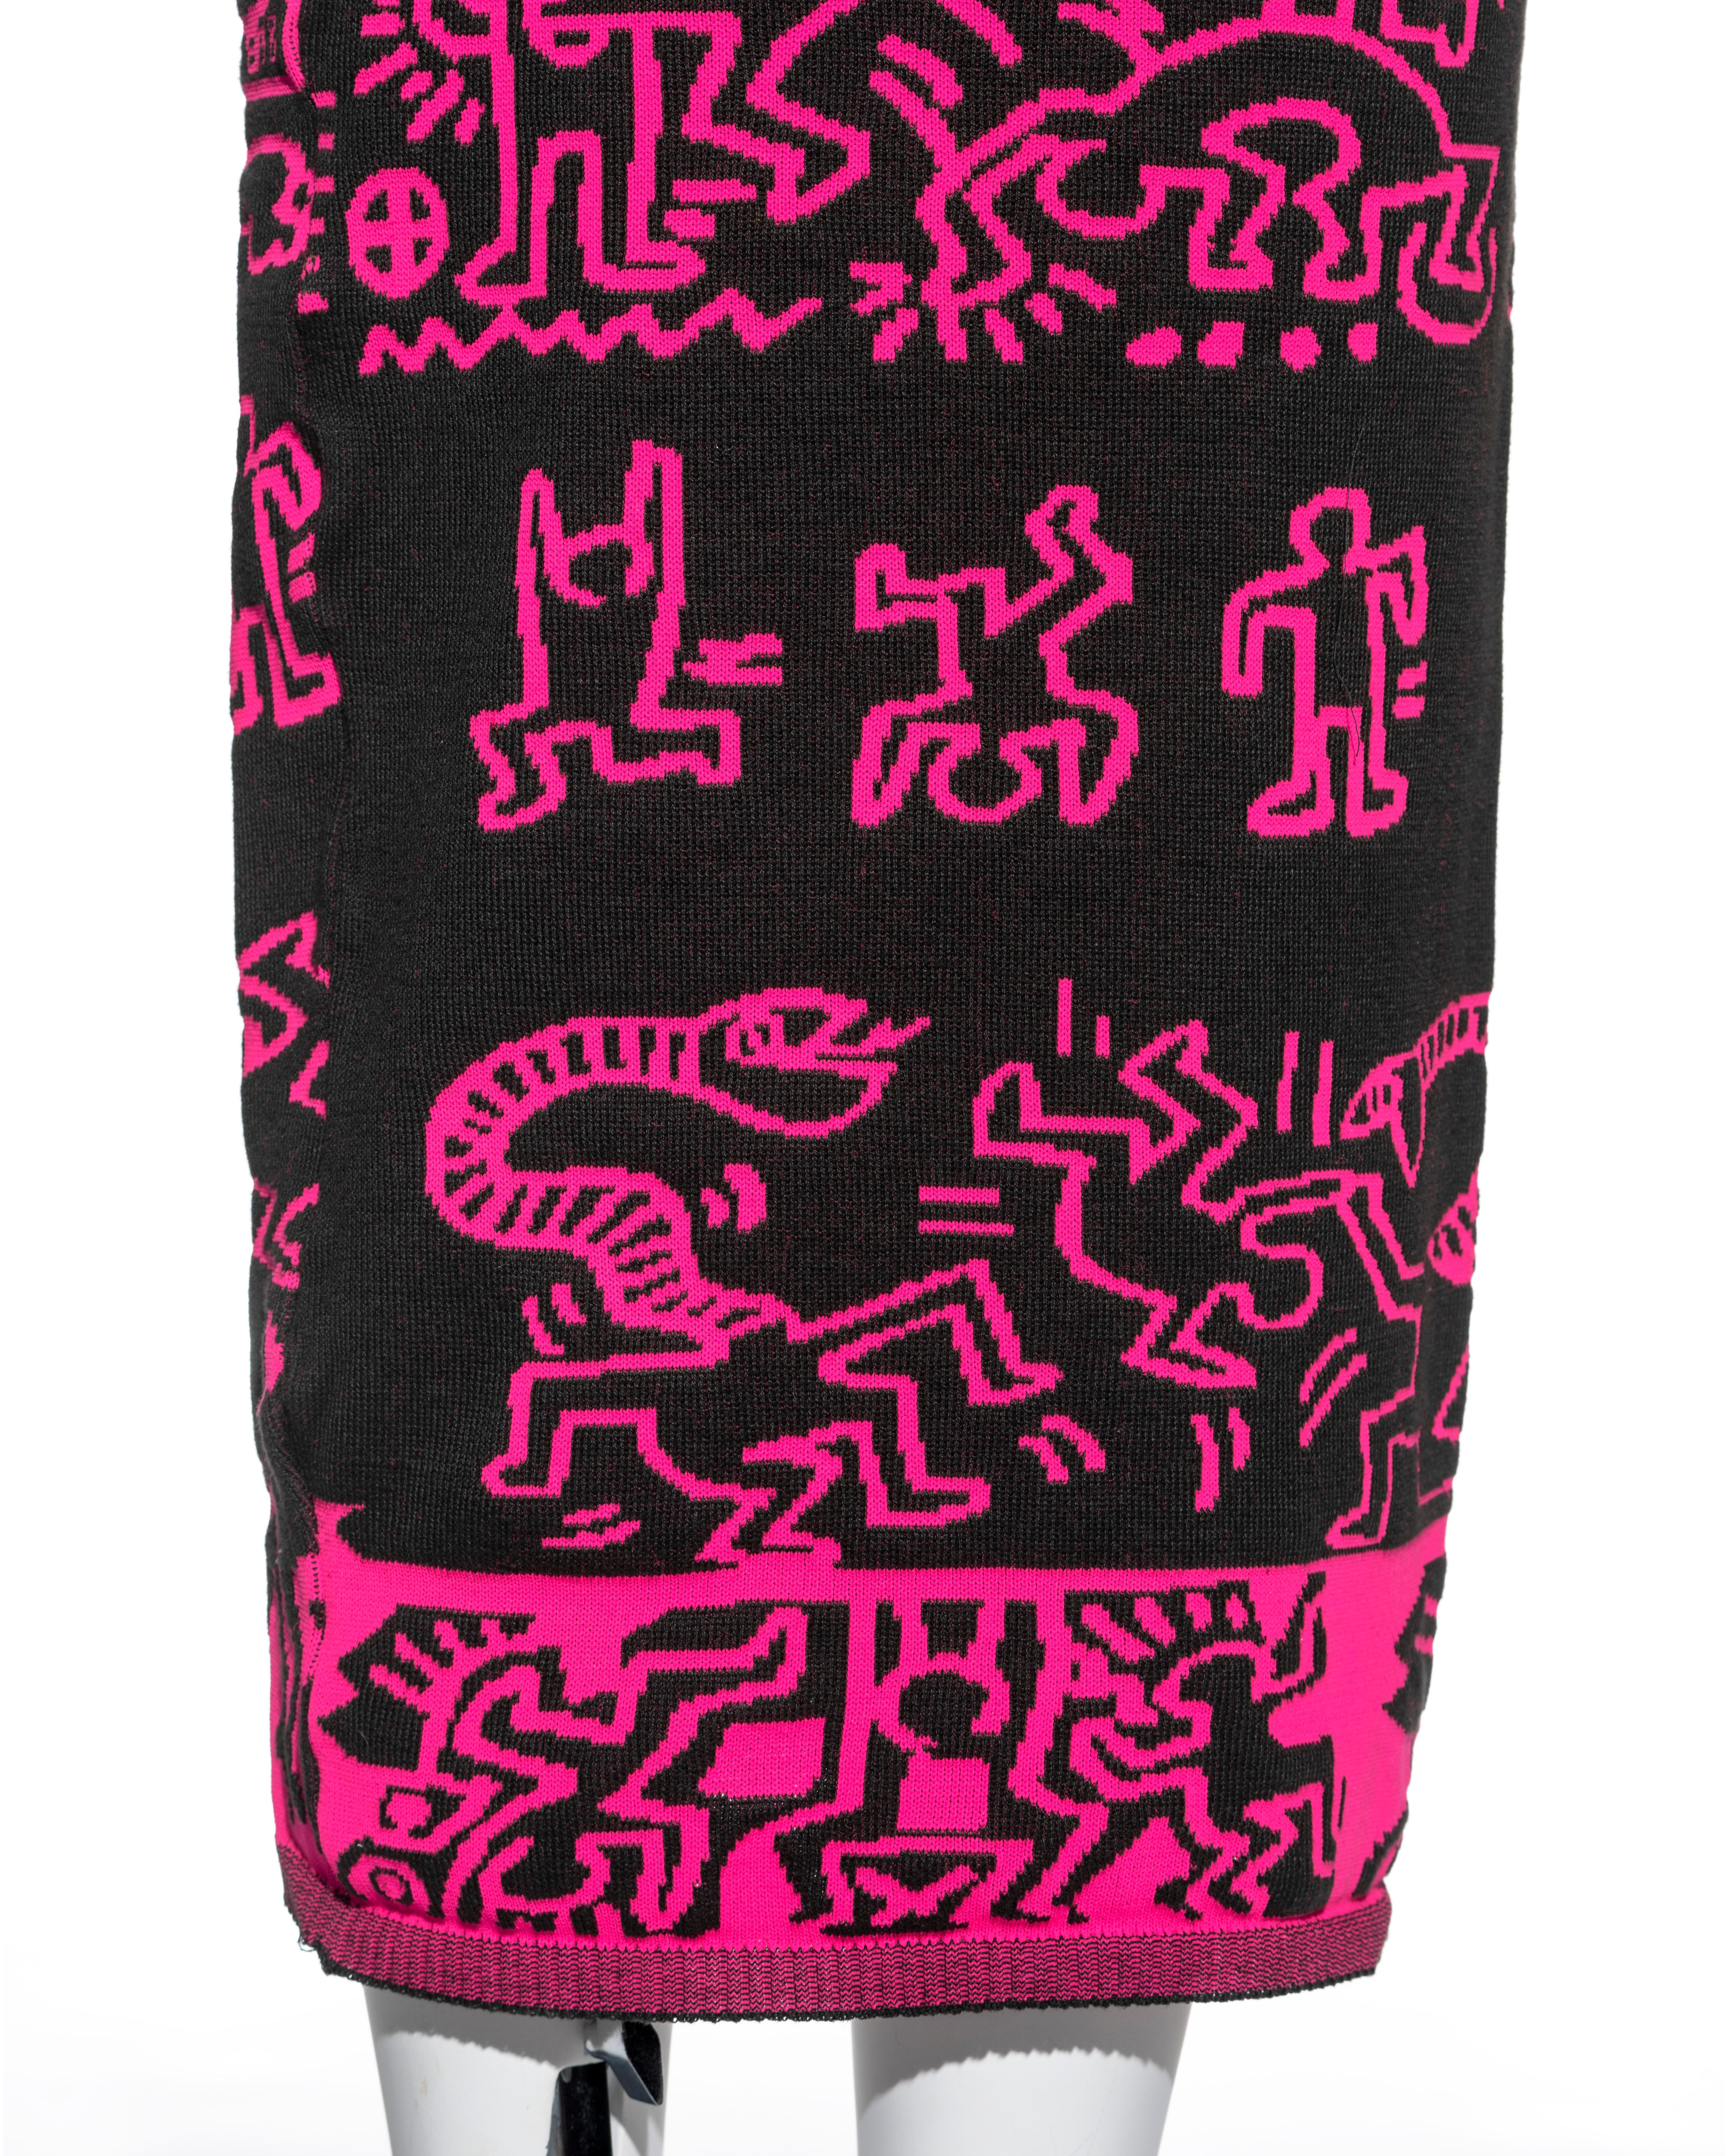 Vivienne Westwood x Malcolm McLaren x Keith Haring 'Witches' skirt suit, fw 1983 For Sale 3